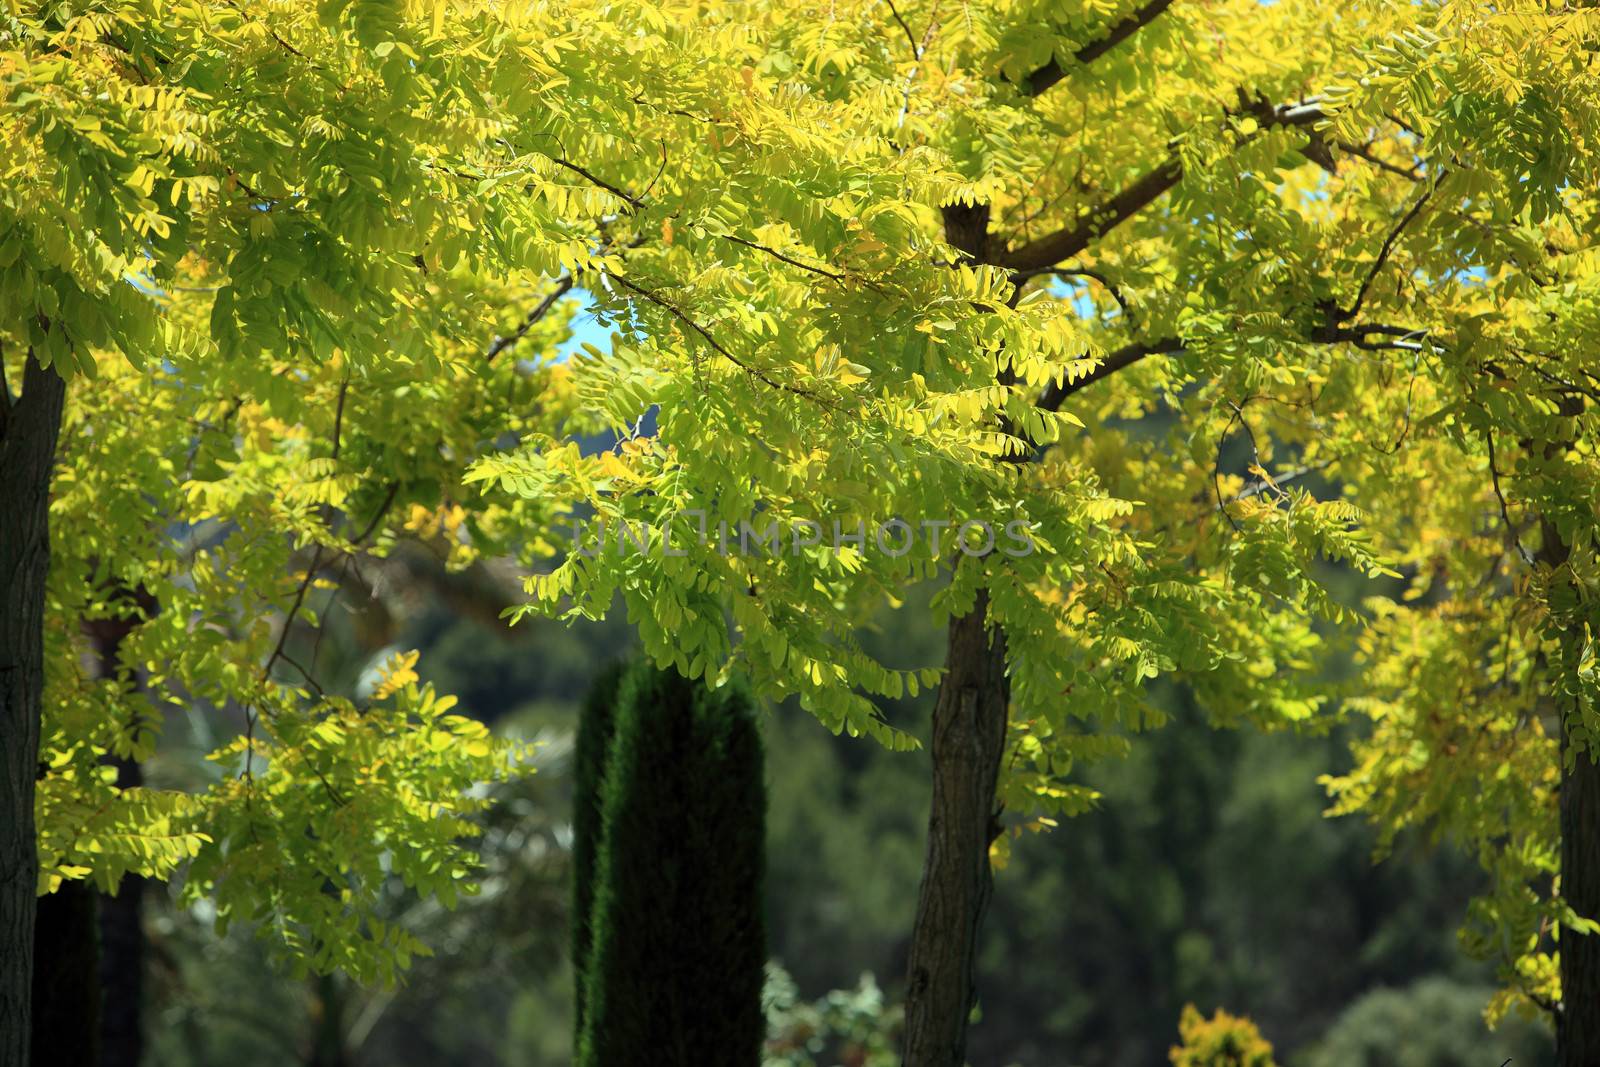 Leafy trees with yellow foliage by Farina6000